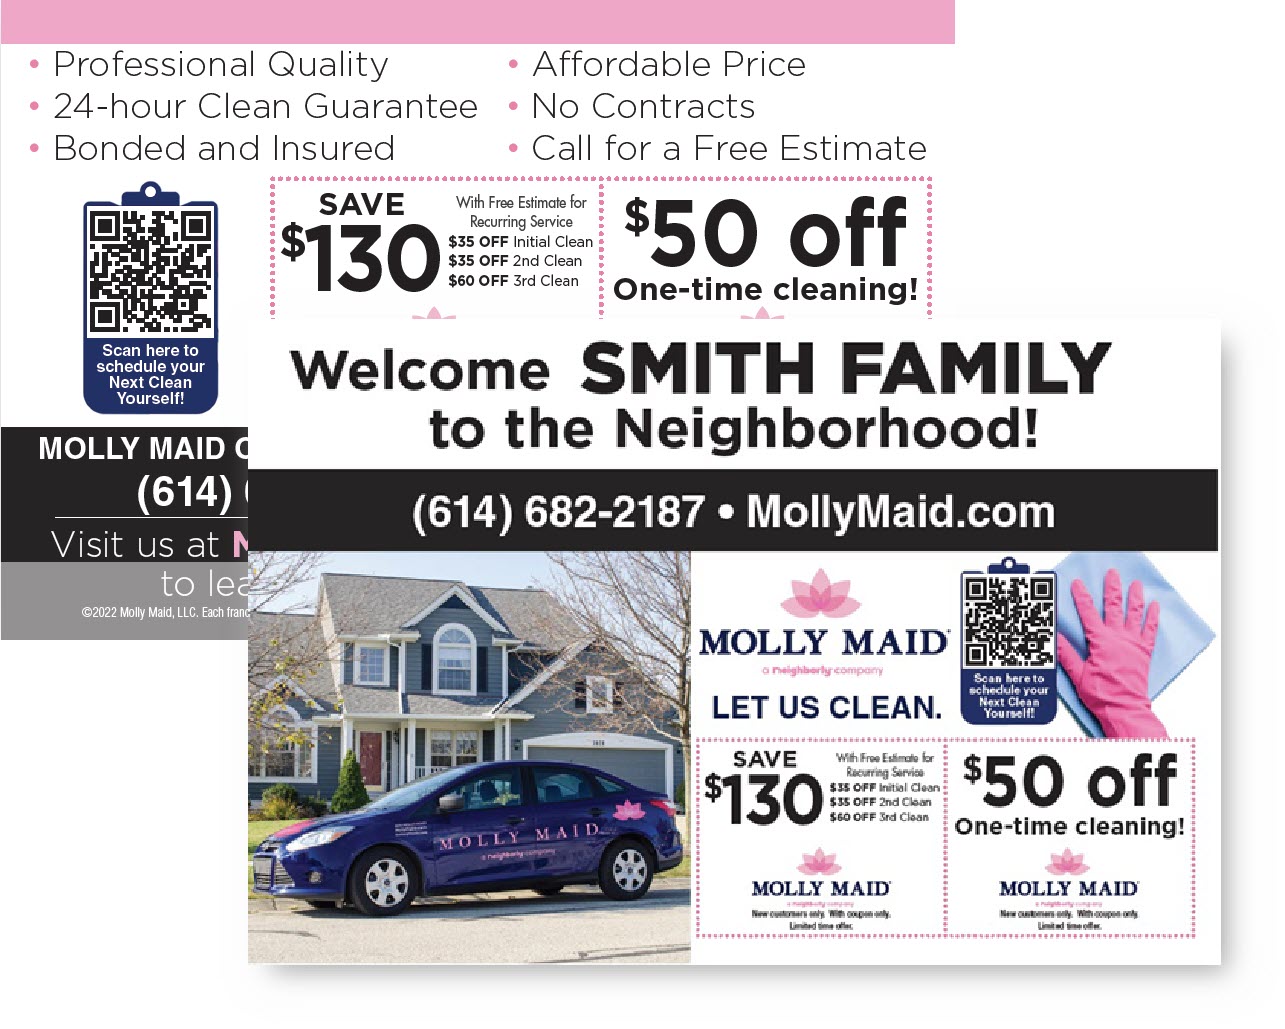 Molly Maid cleaning company new mover postcard